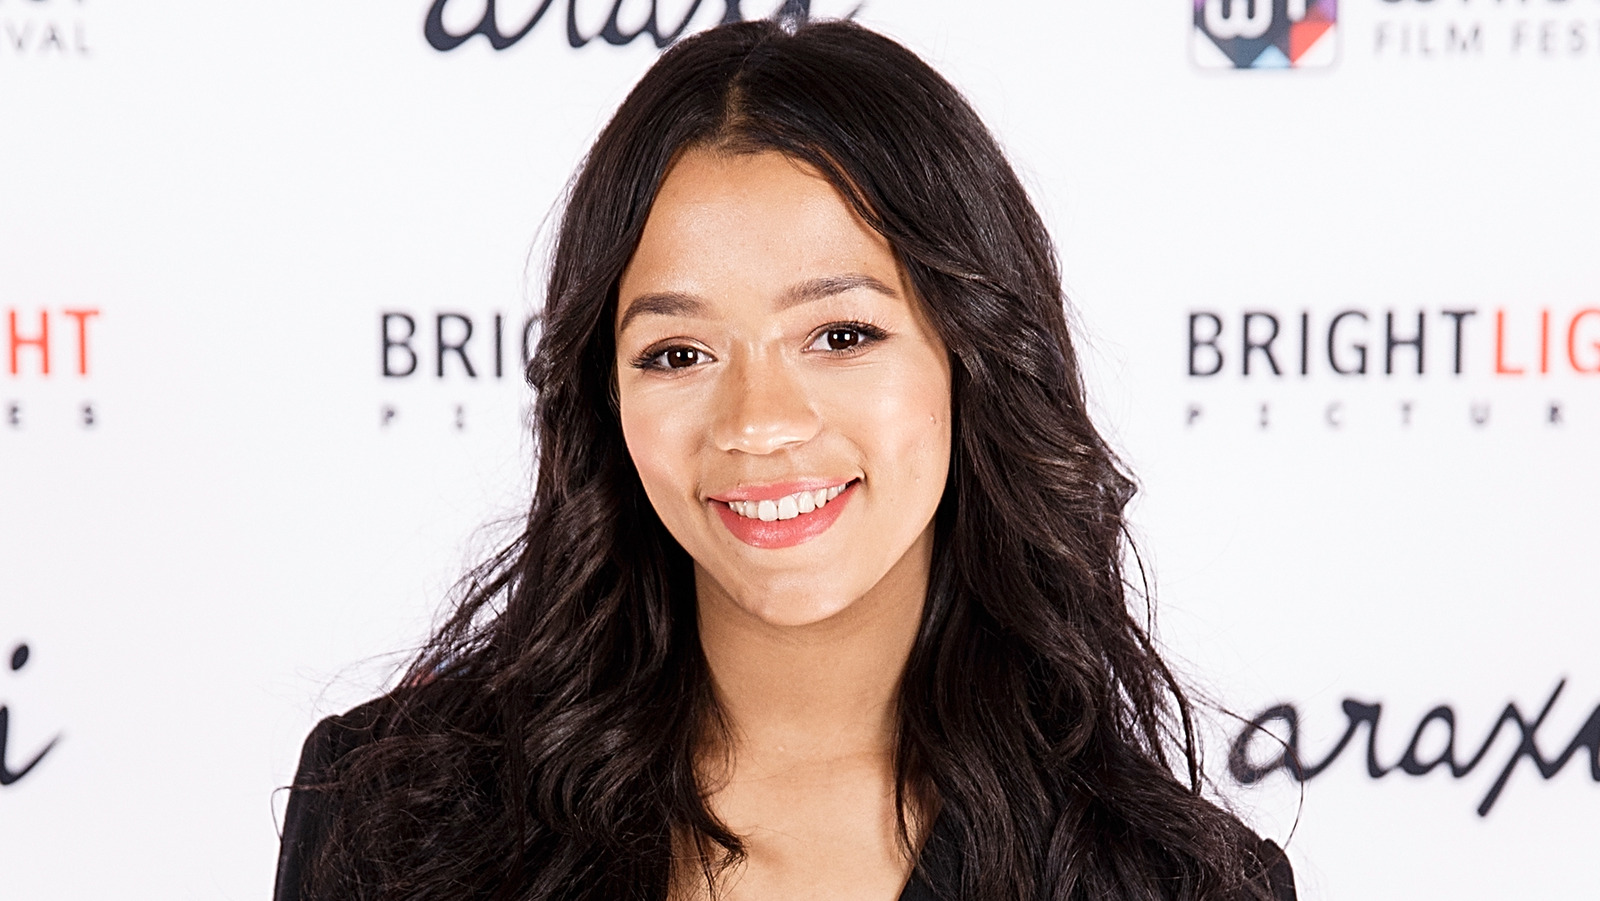 Get To Know Taylor Russell: Age, Movies, TV Shows & More - Capital